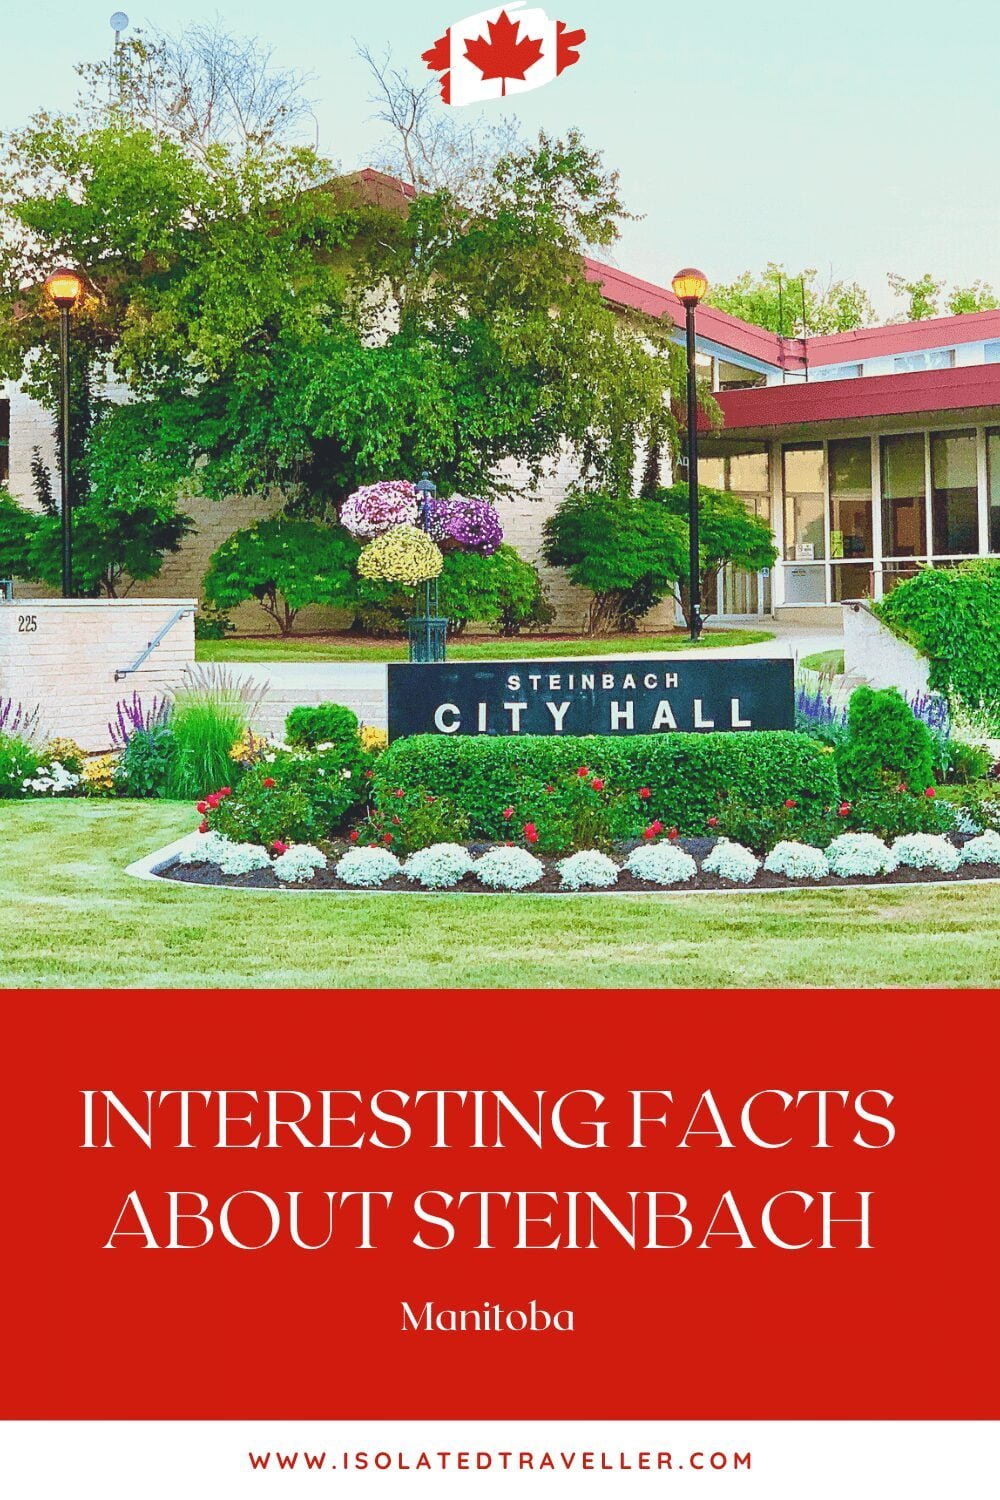 Facts About Steinbach